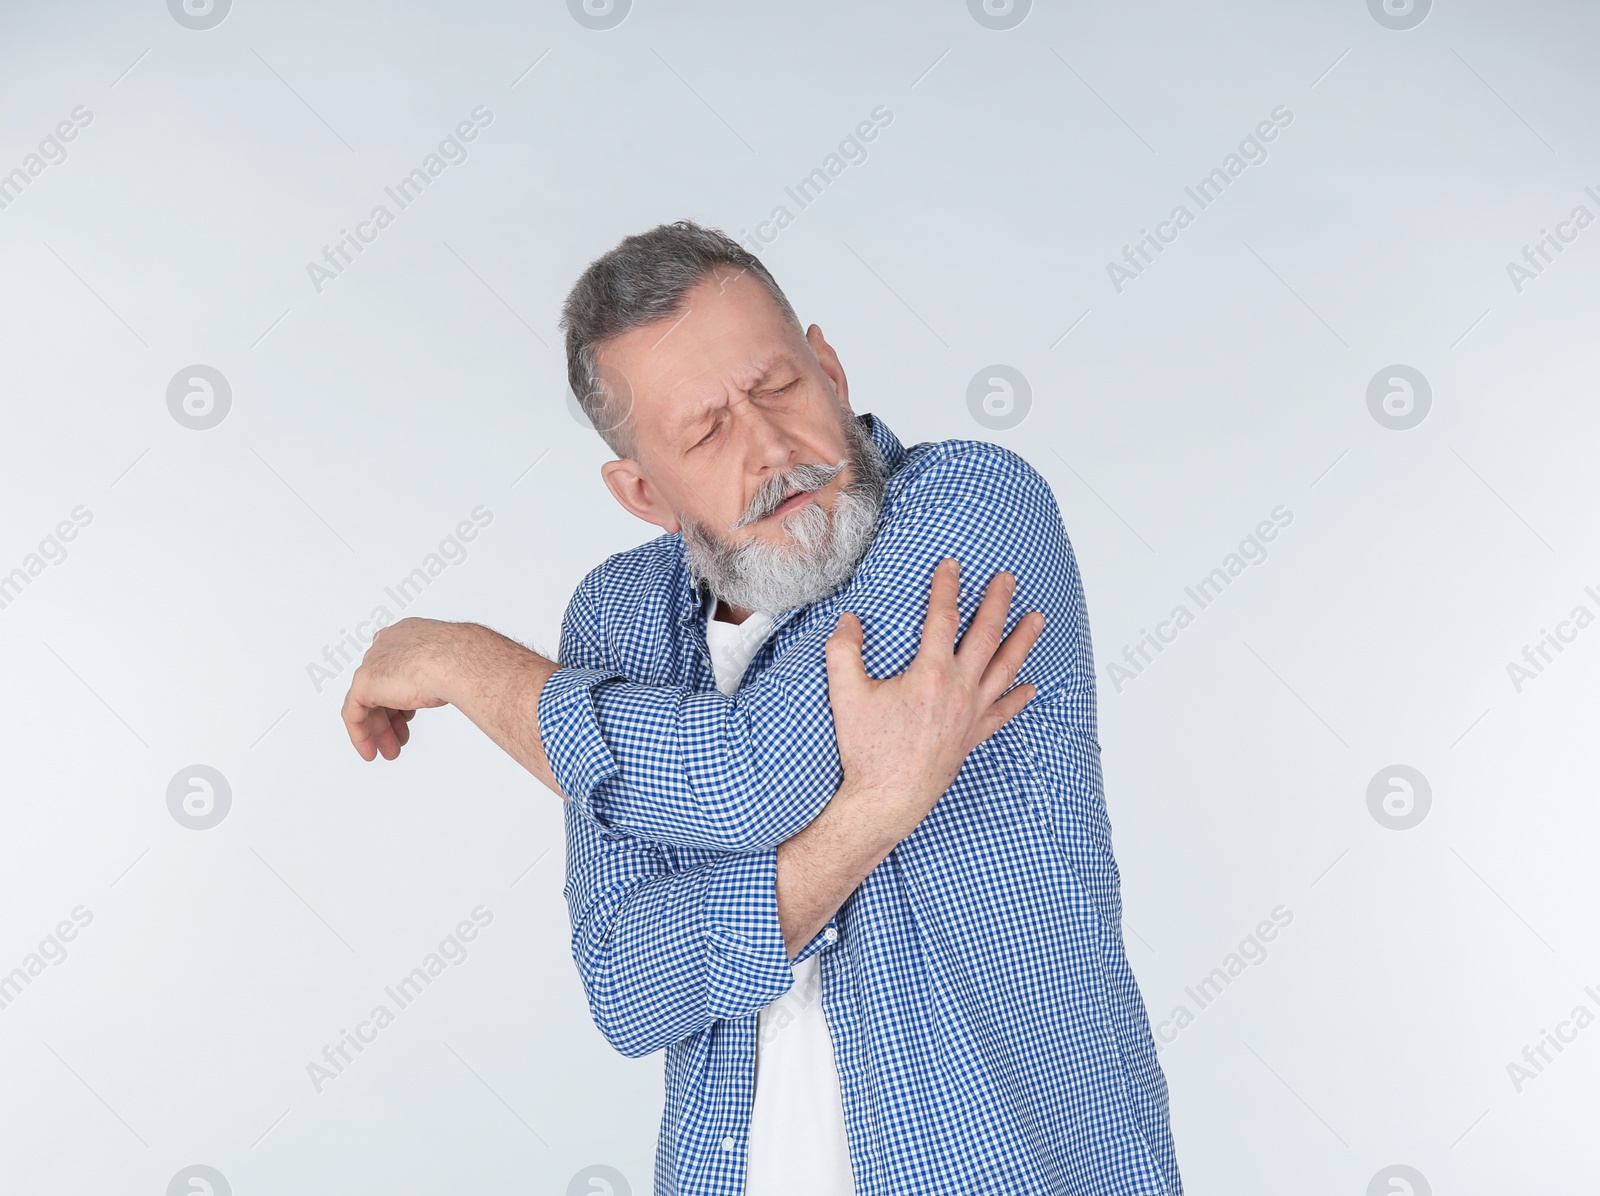 Photo of Man suffering from arm pain on light background